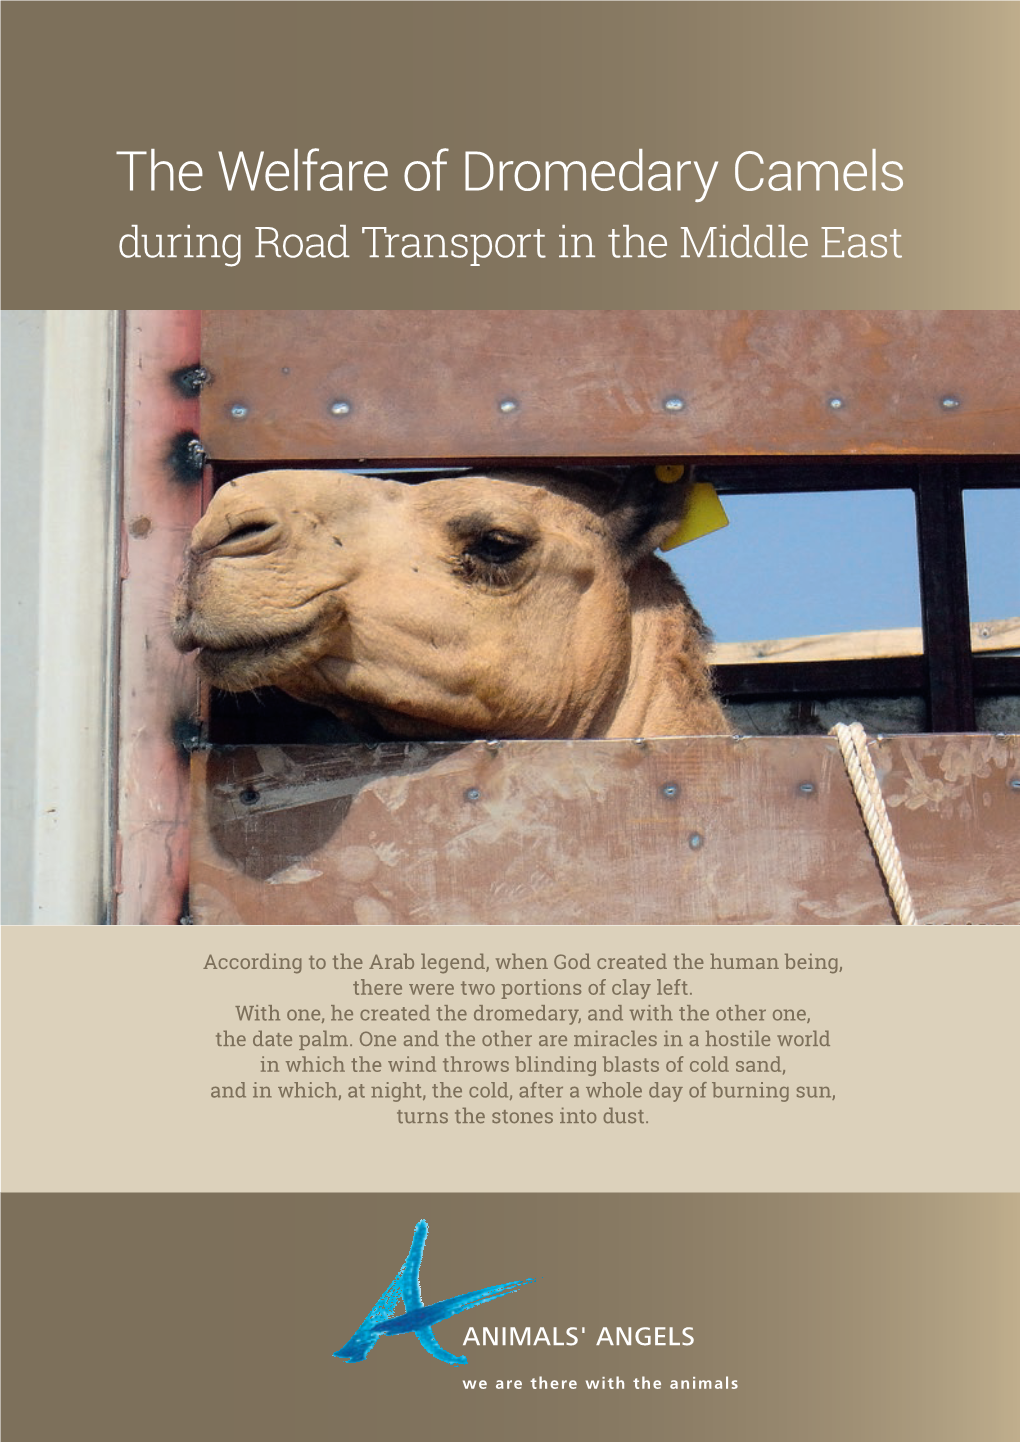 The Welfare of Dromedary Camels During Road Transport in the Middle East